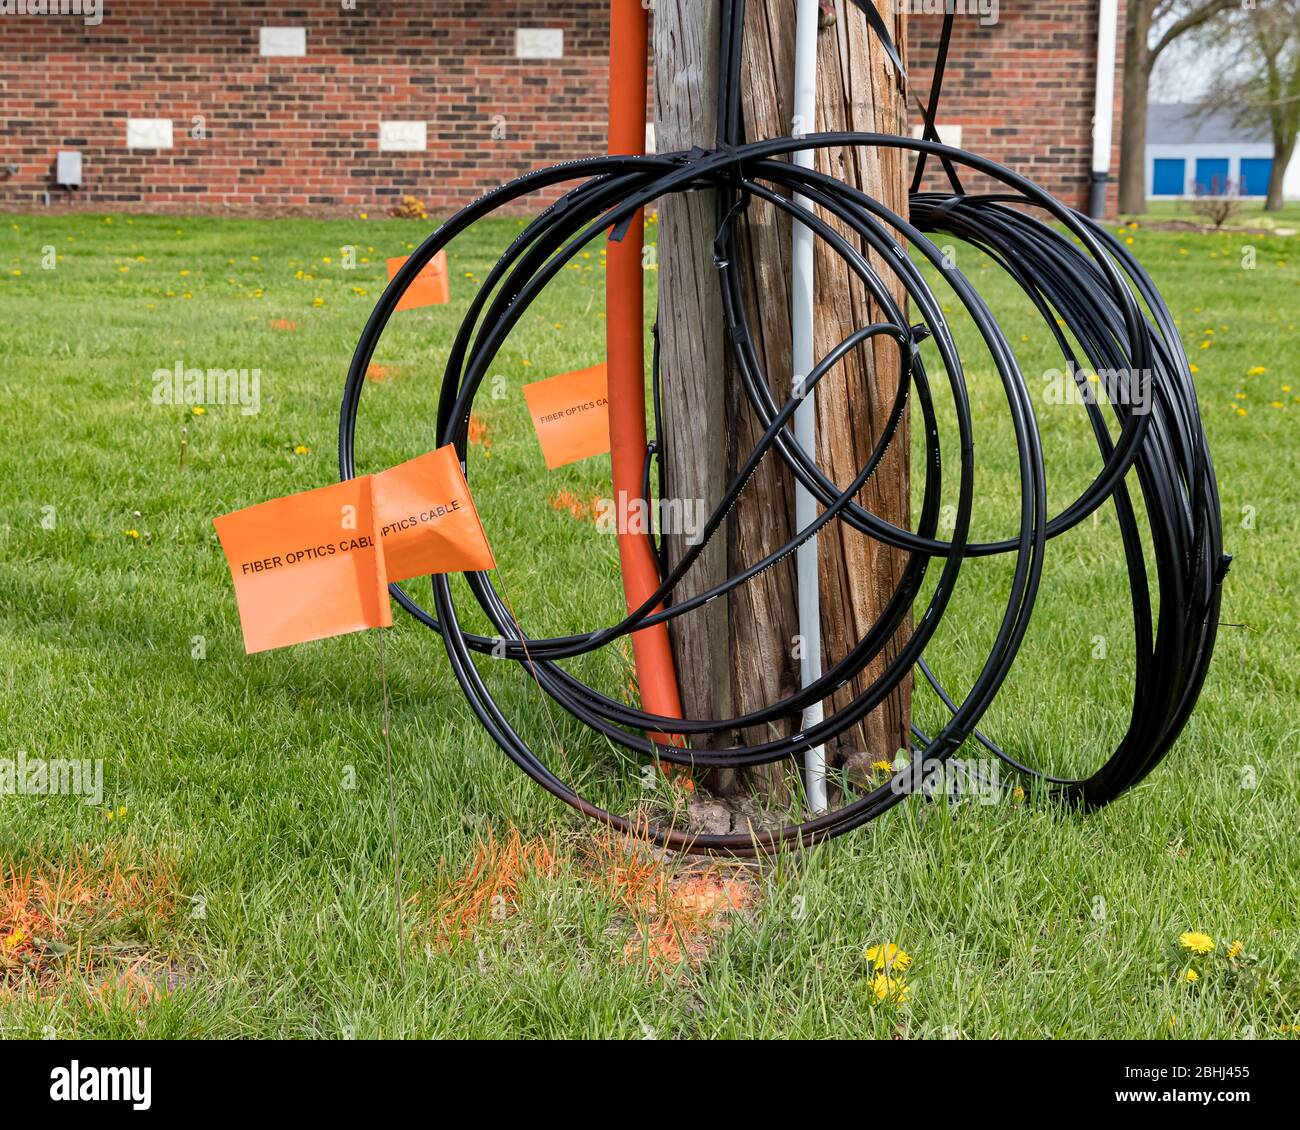 Fiber optic cable, orange marking flags and utility pole. Concept of digging safety, utility locate service and high speed internet, broadband access Stock Photo